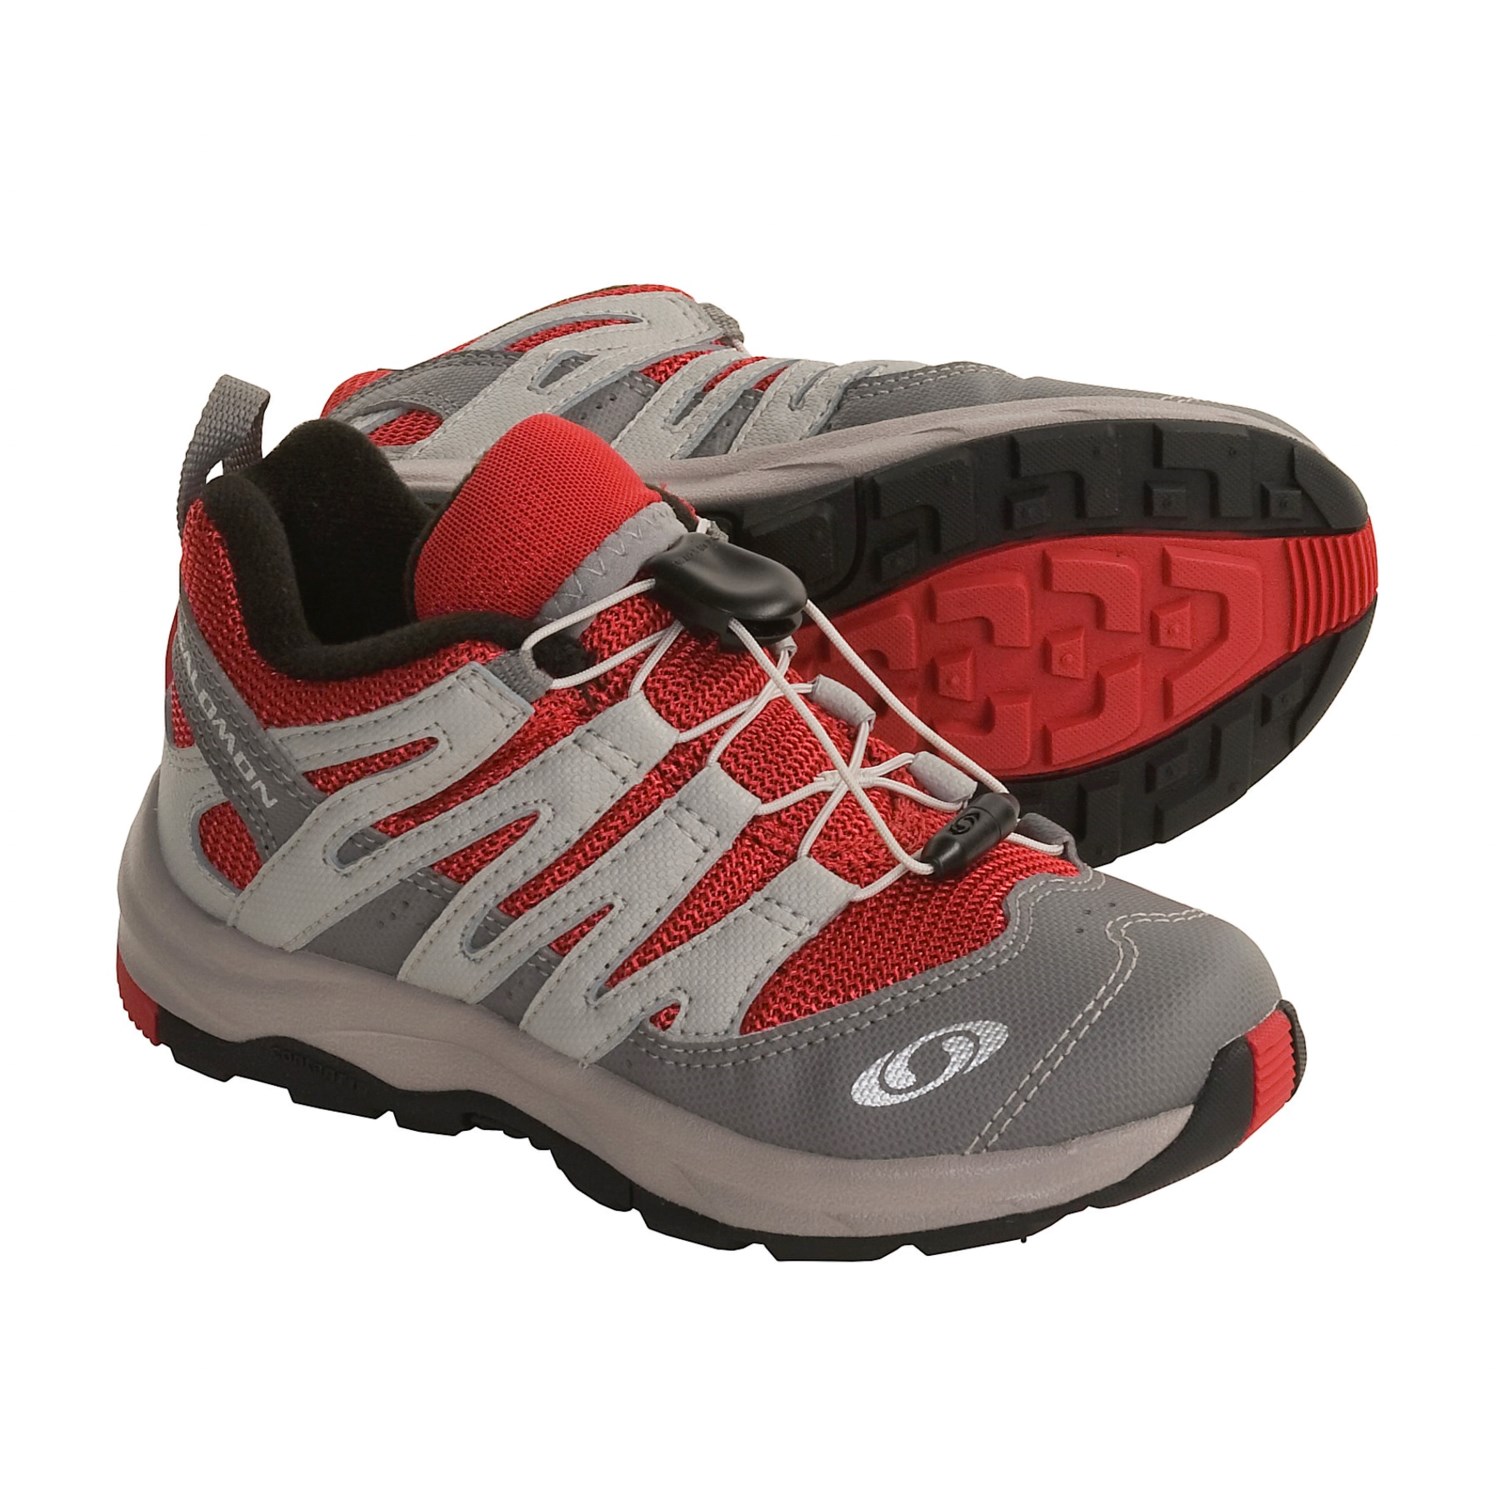 Salomon XA Pro Running Shoes (For Kids and Youth) 2195N - Save 30%